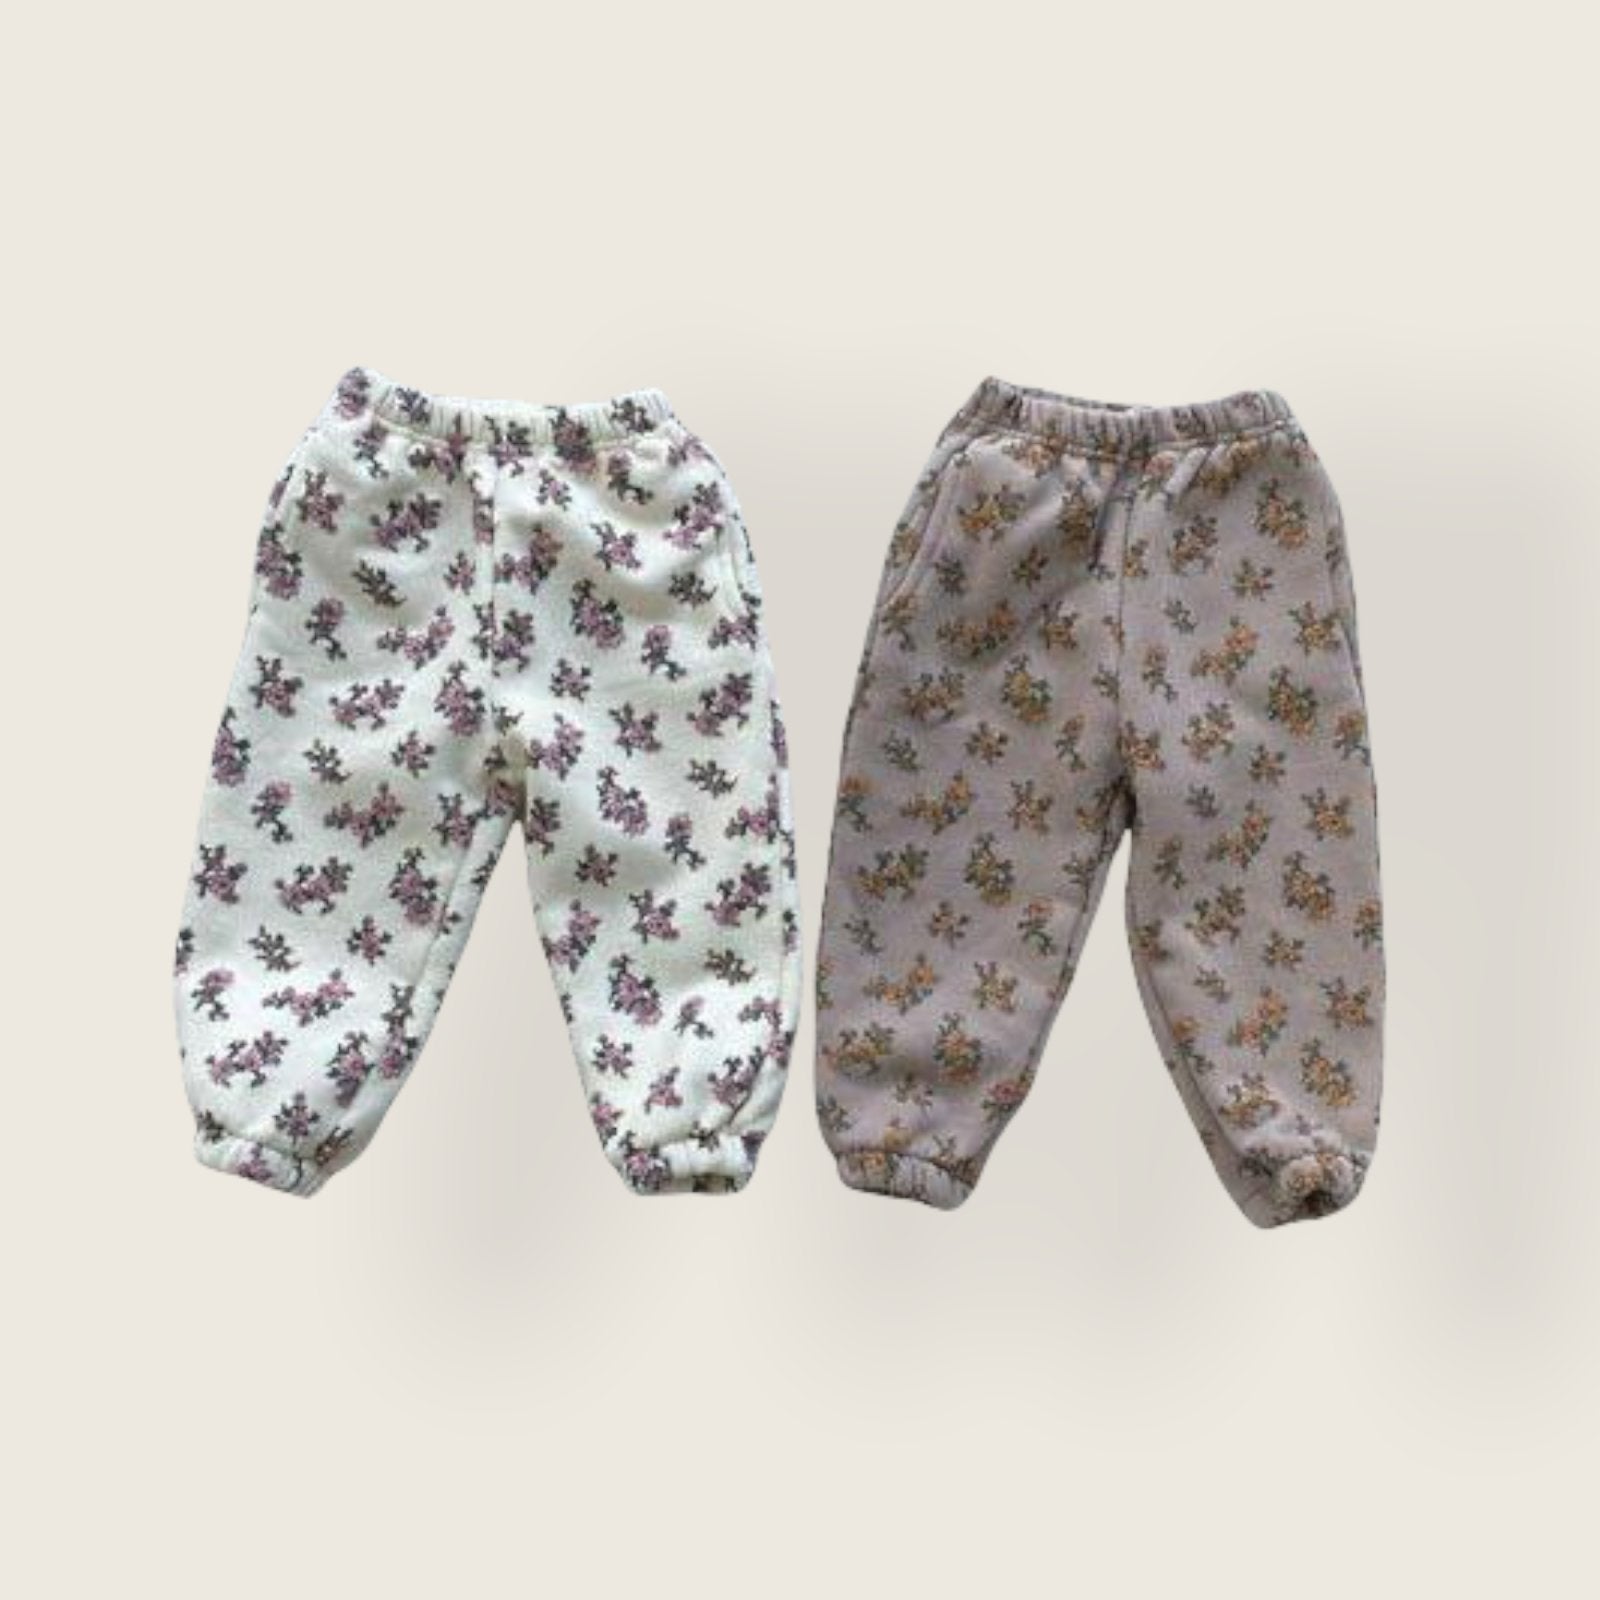 Flower Pants find Stylish Fashion for Little People- at Little Foxx Concept Store